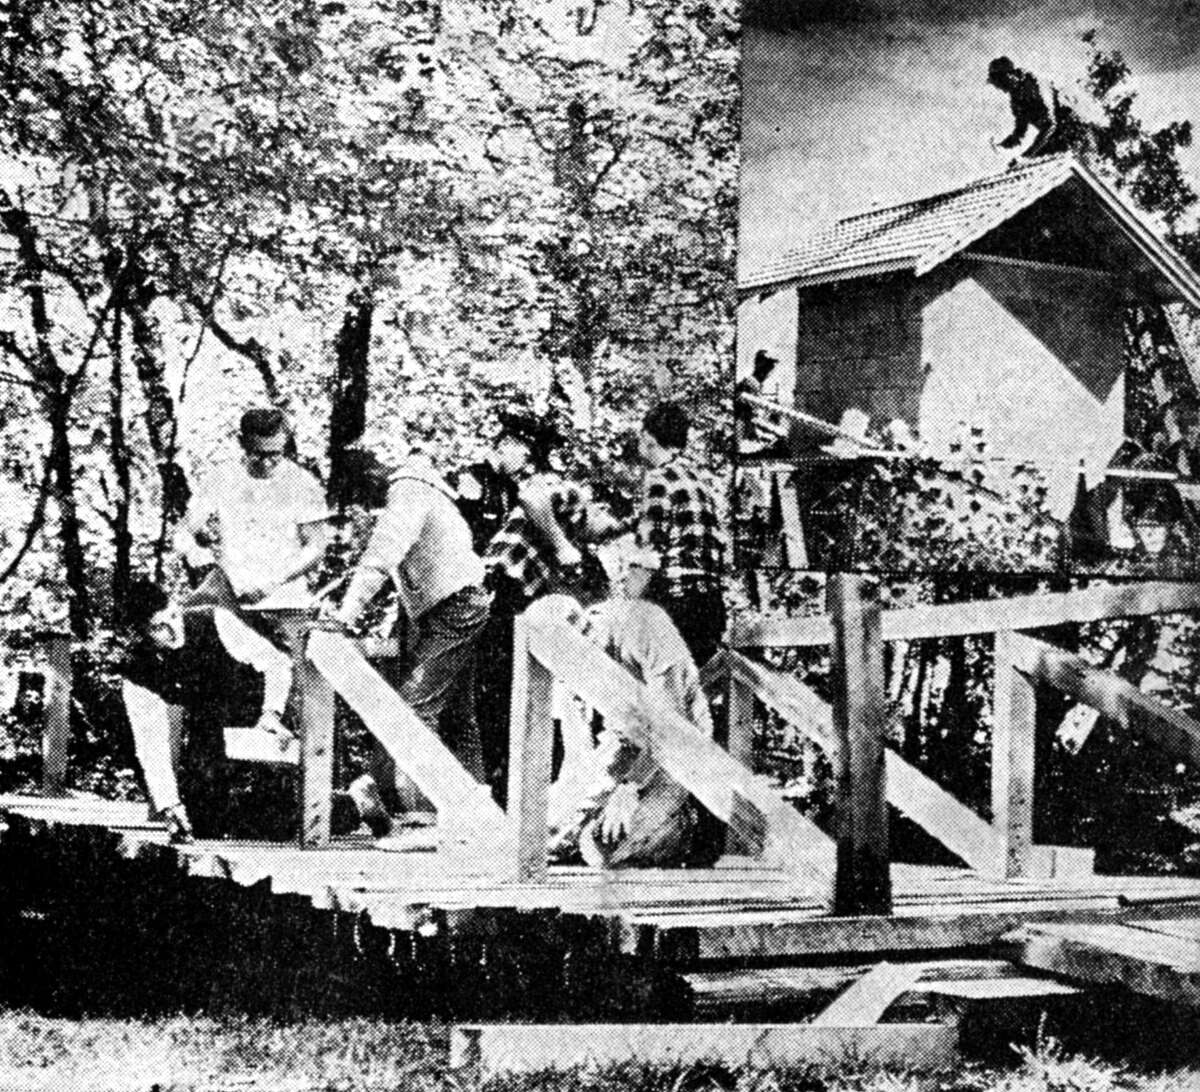 Explorer Scouts donated their time Saturday morning bridging the gap between the two picnic areas located at the south end of First Street Beach. The bridge work along with the pump house (inset photo) was being done in cooperation with the Manistee Jaycees overall beach project. The photo was published in the News Advocate on Sept. 17, 1962.